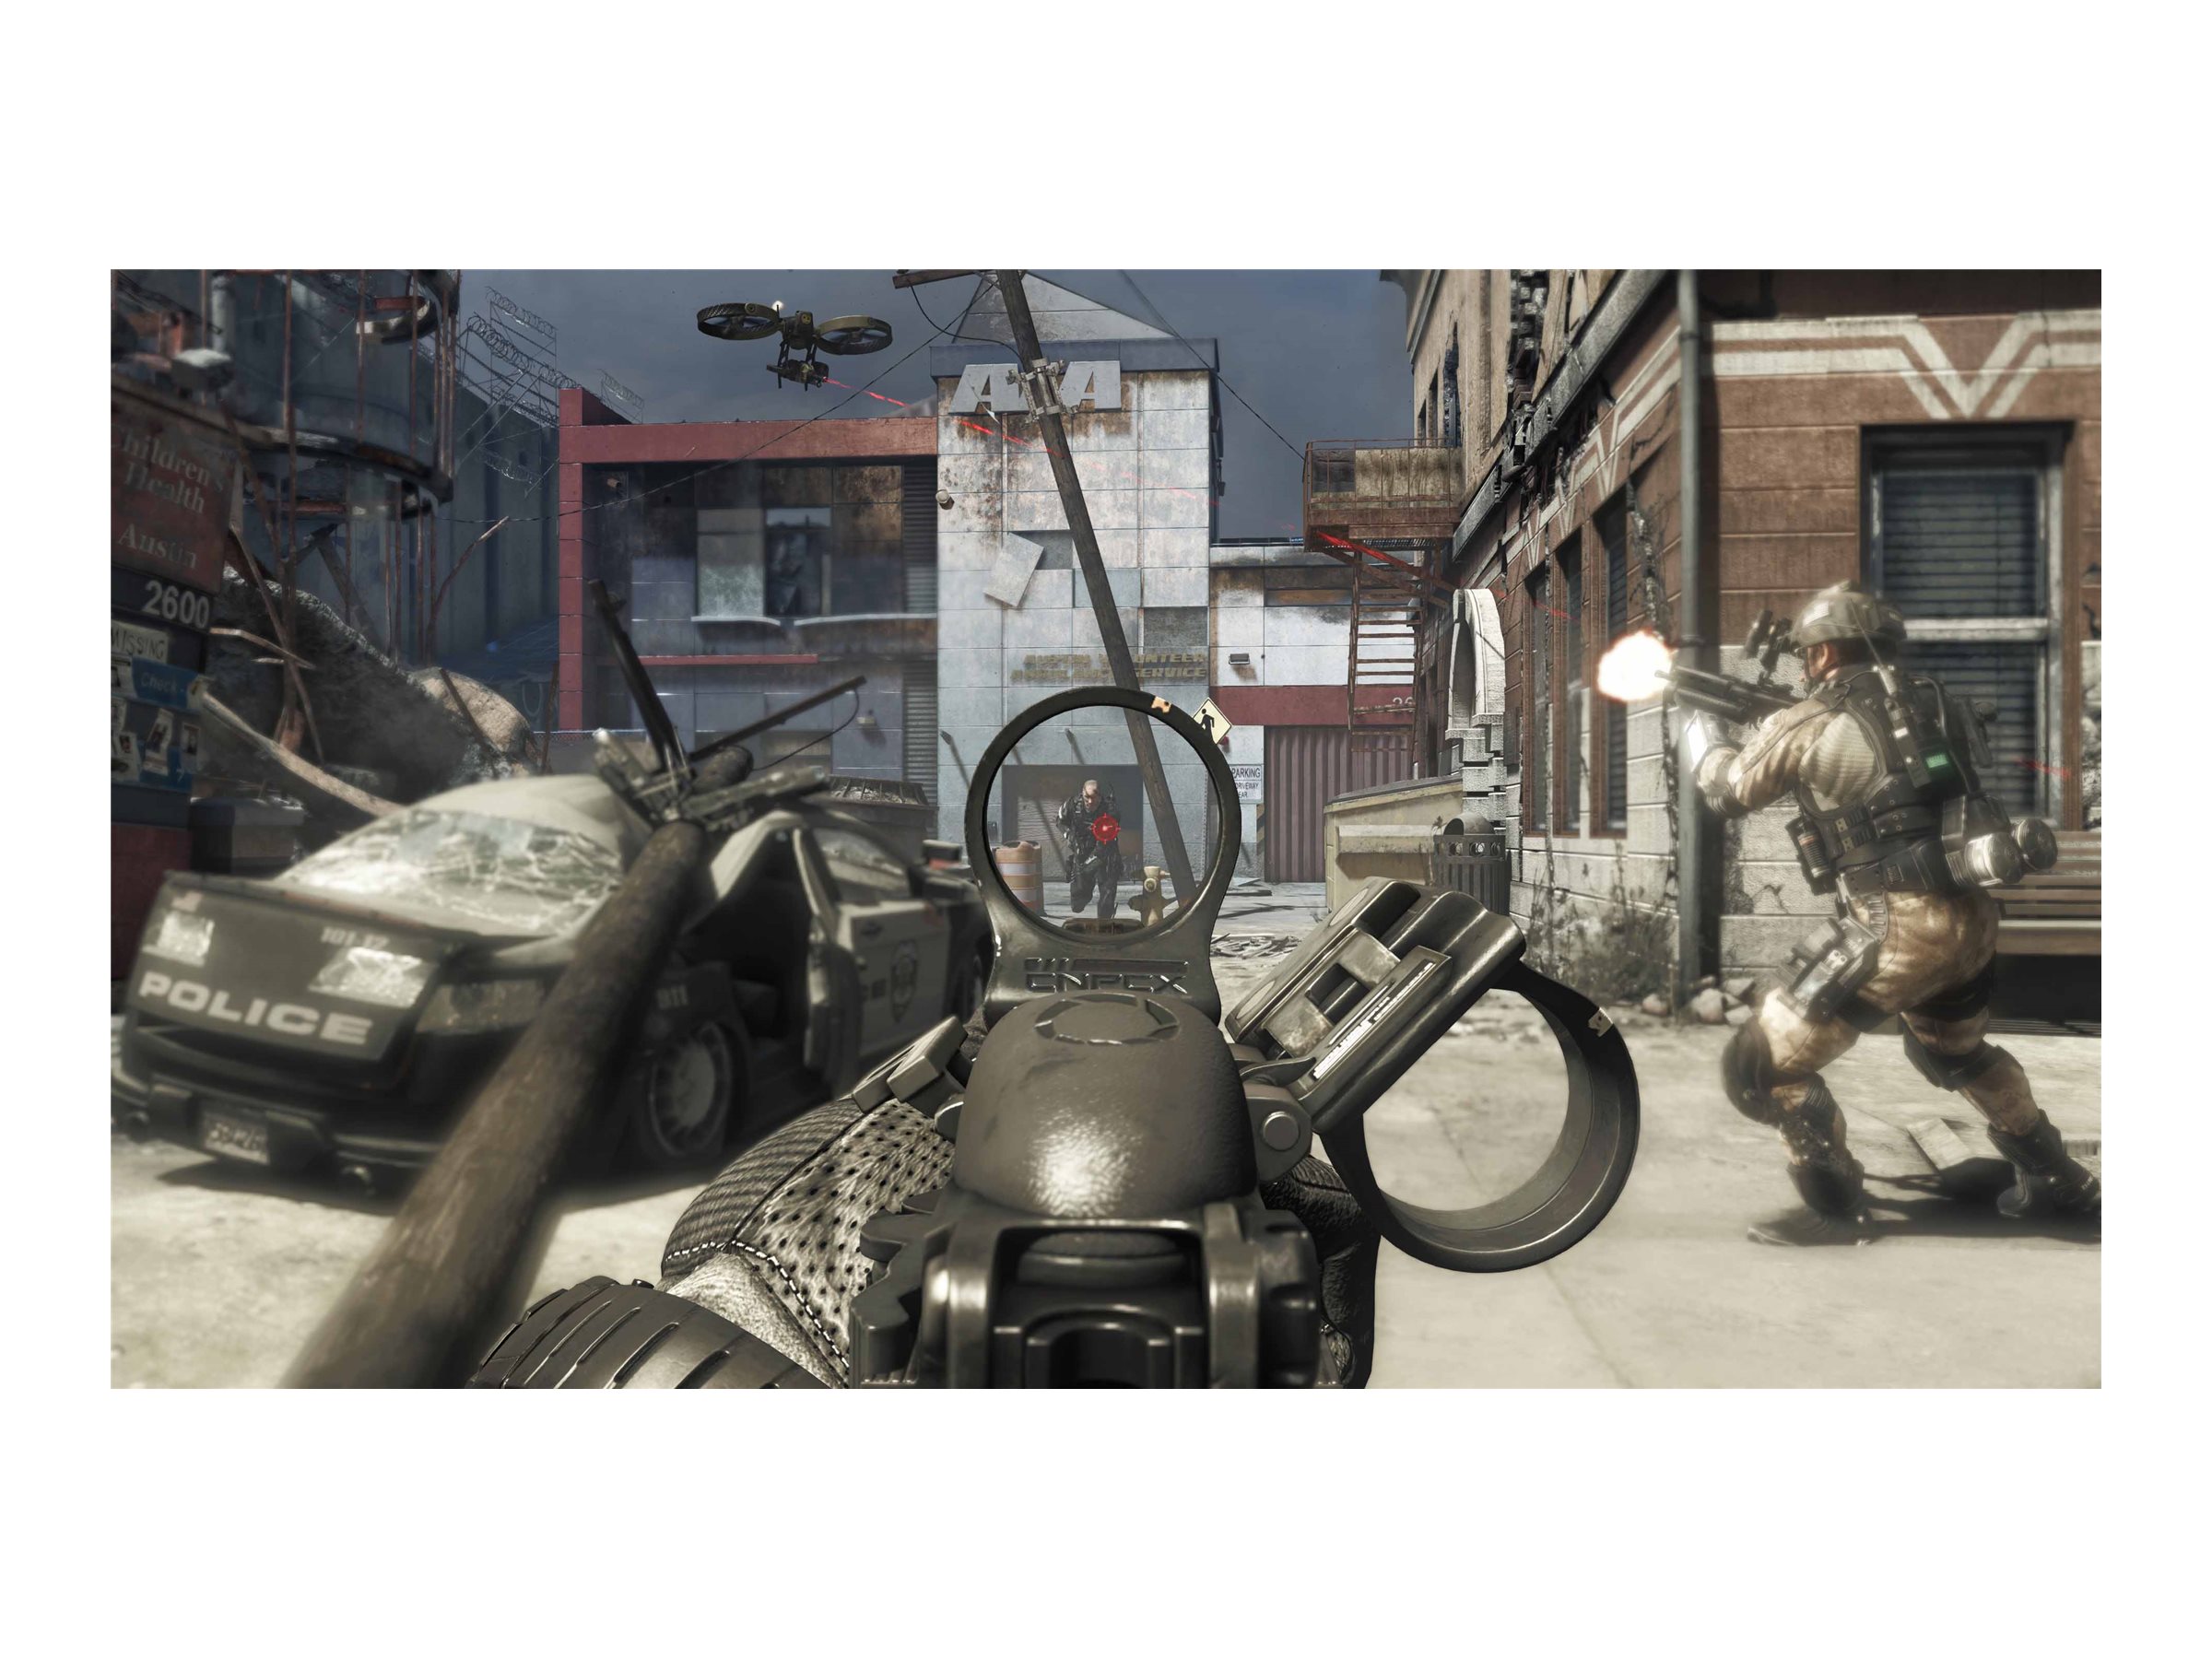 Call of Duty: Ghosts, Activision, PlayStation 3, 047875846777 - image 3 of 14